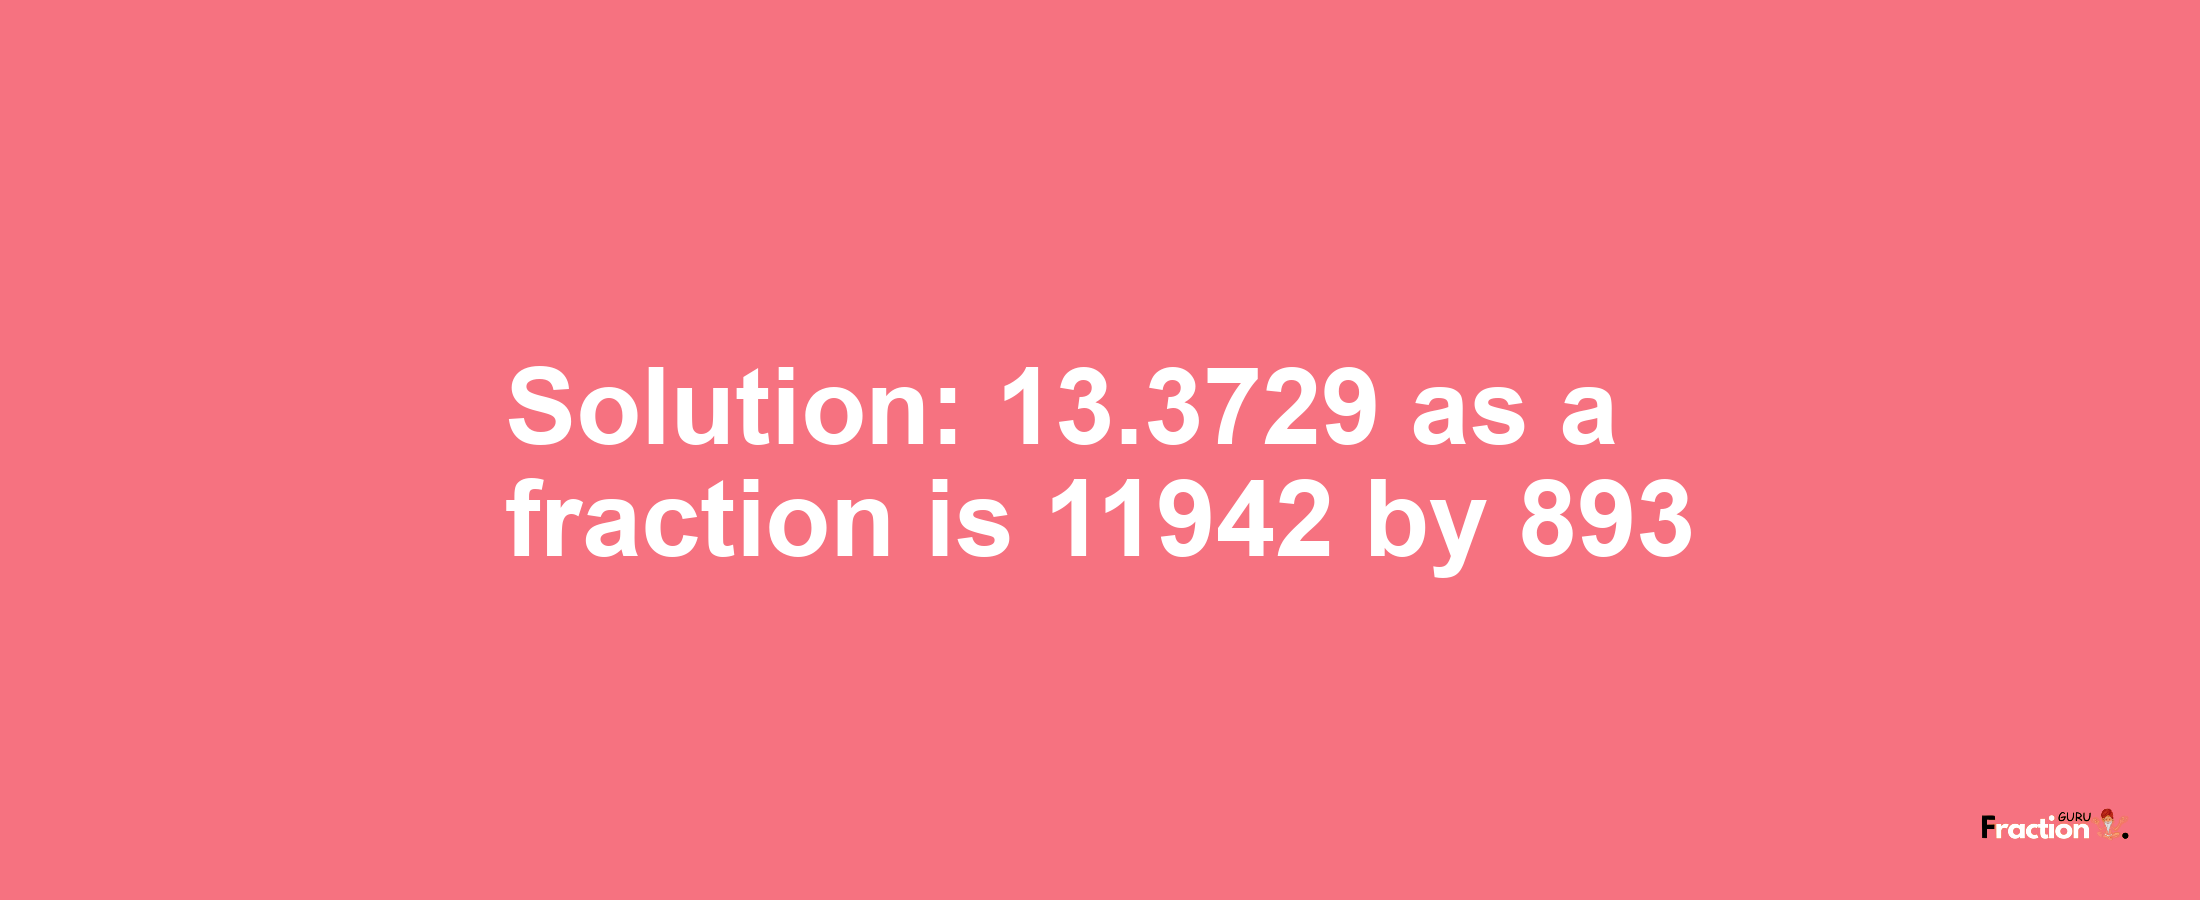 Solution:13.3729 as a fraction is 11942/893